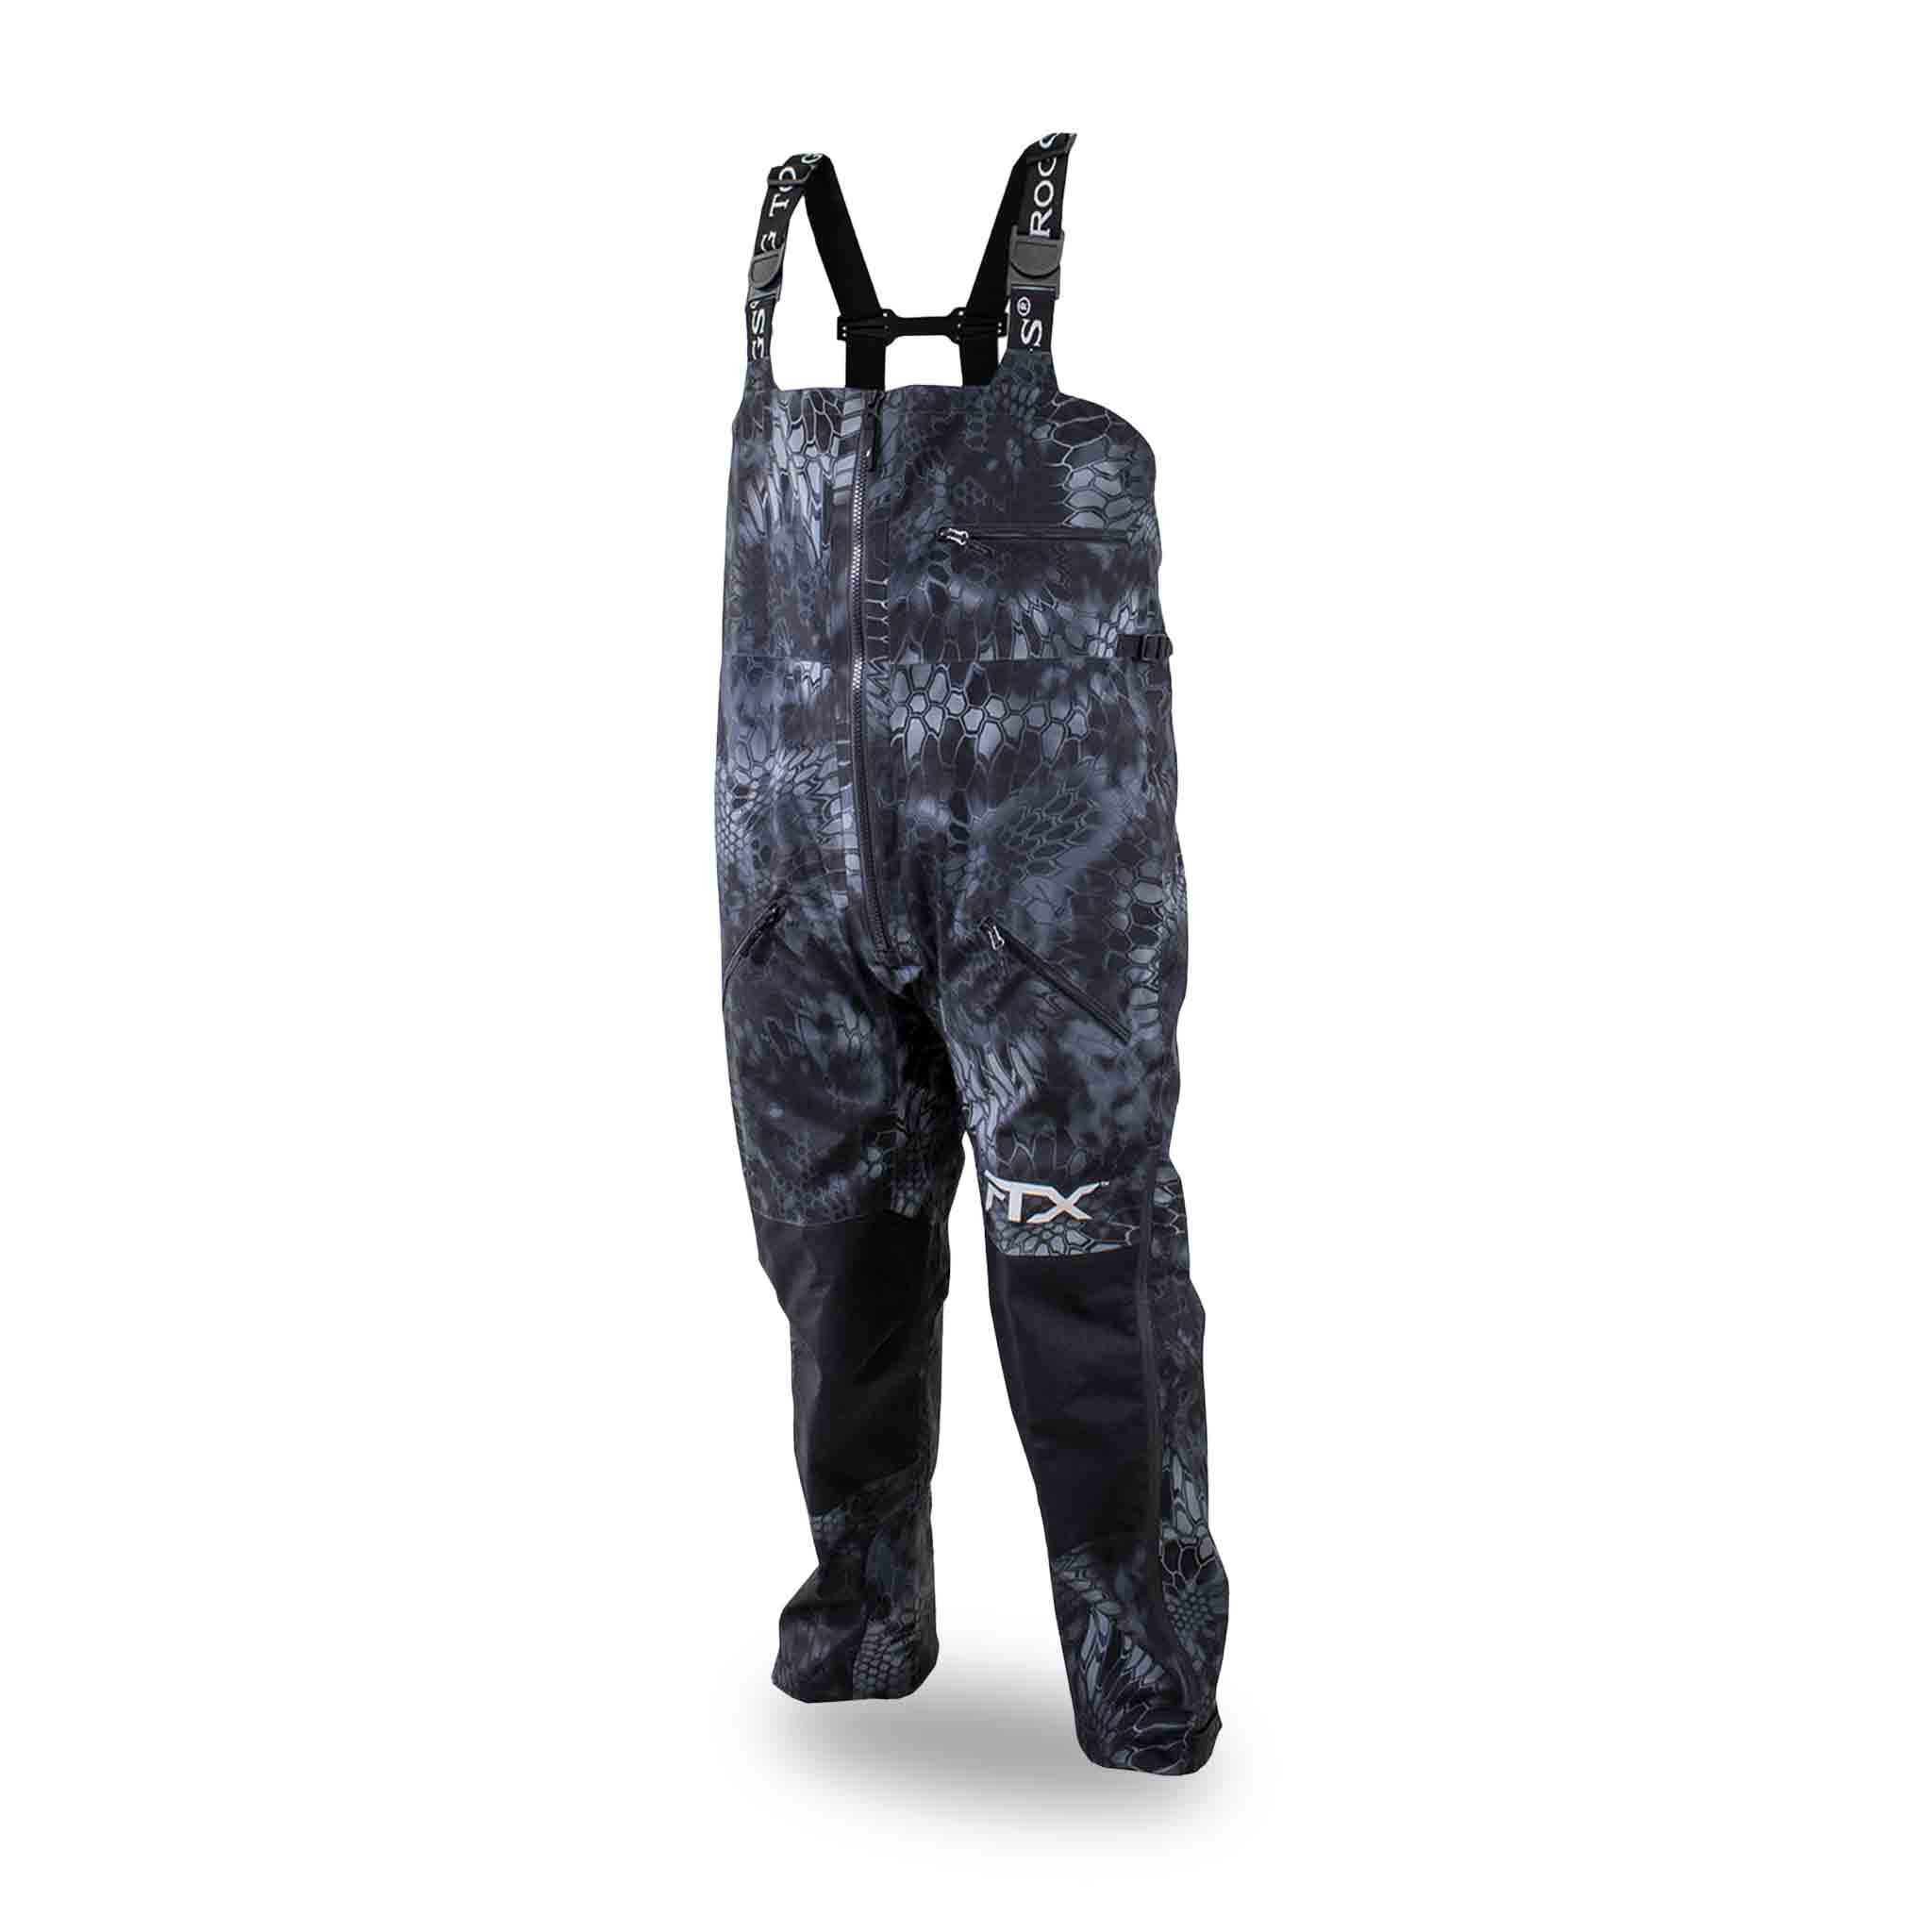 Fishing Waders Pants, One Piece Totally Closed Hunting Chest